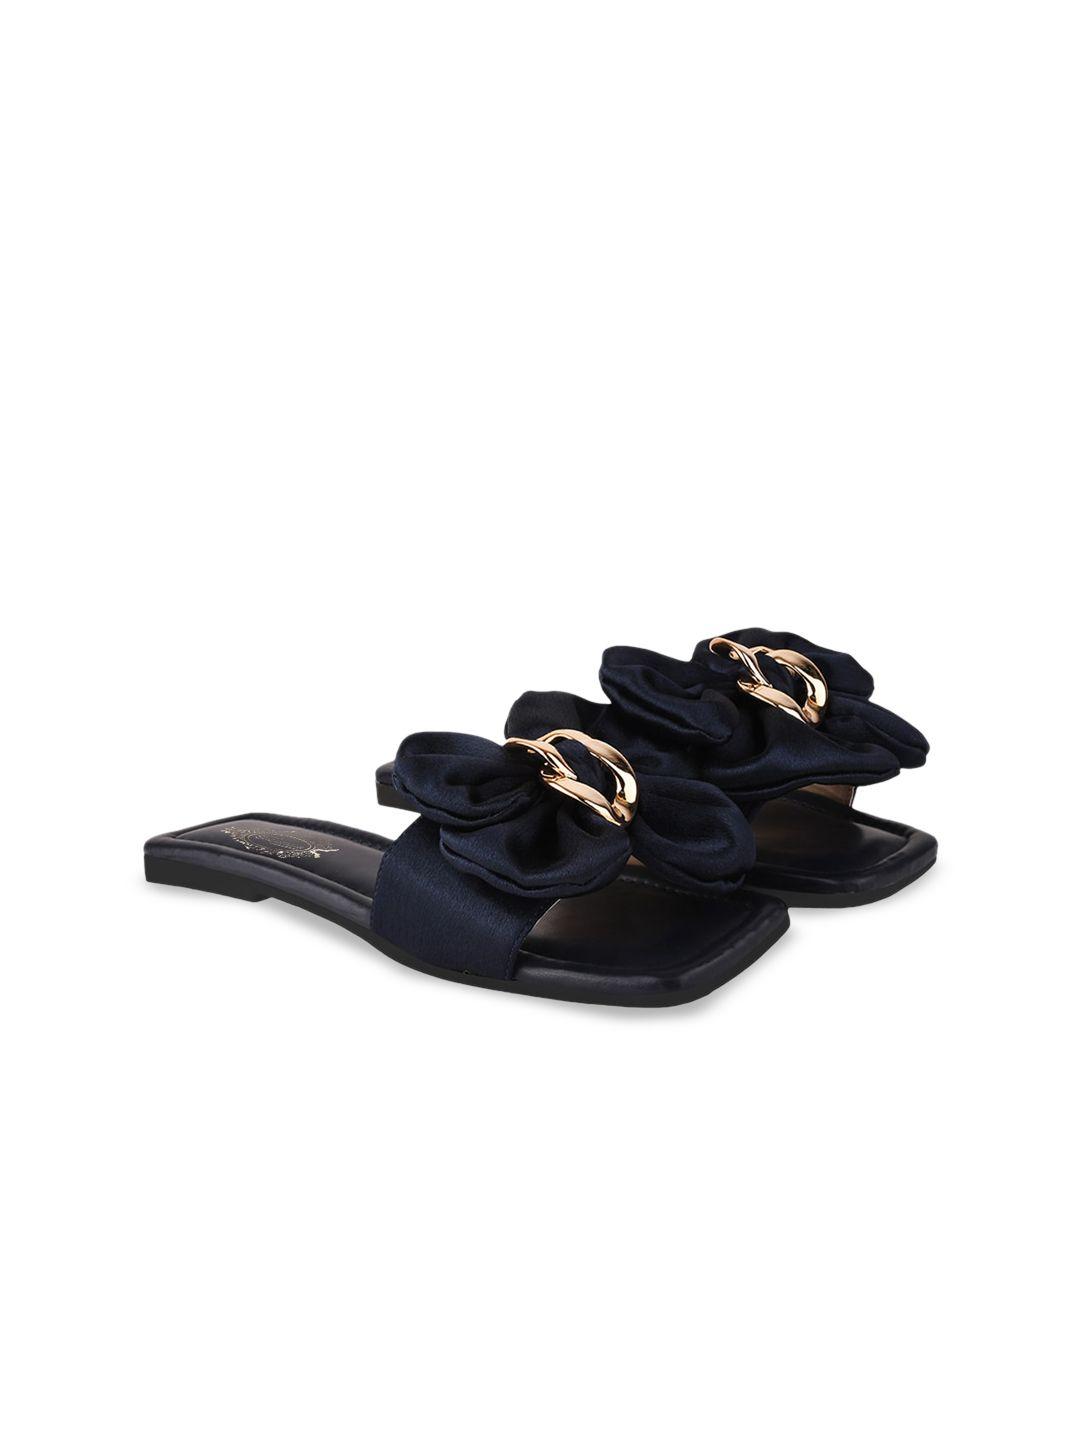 shoetopia girls open toe flats with embellished bows